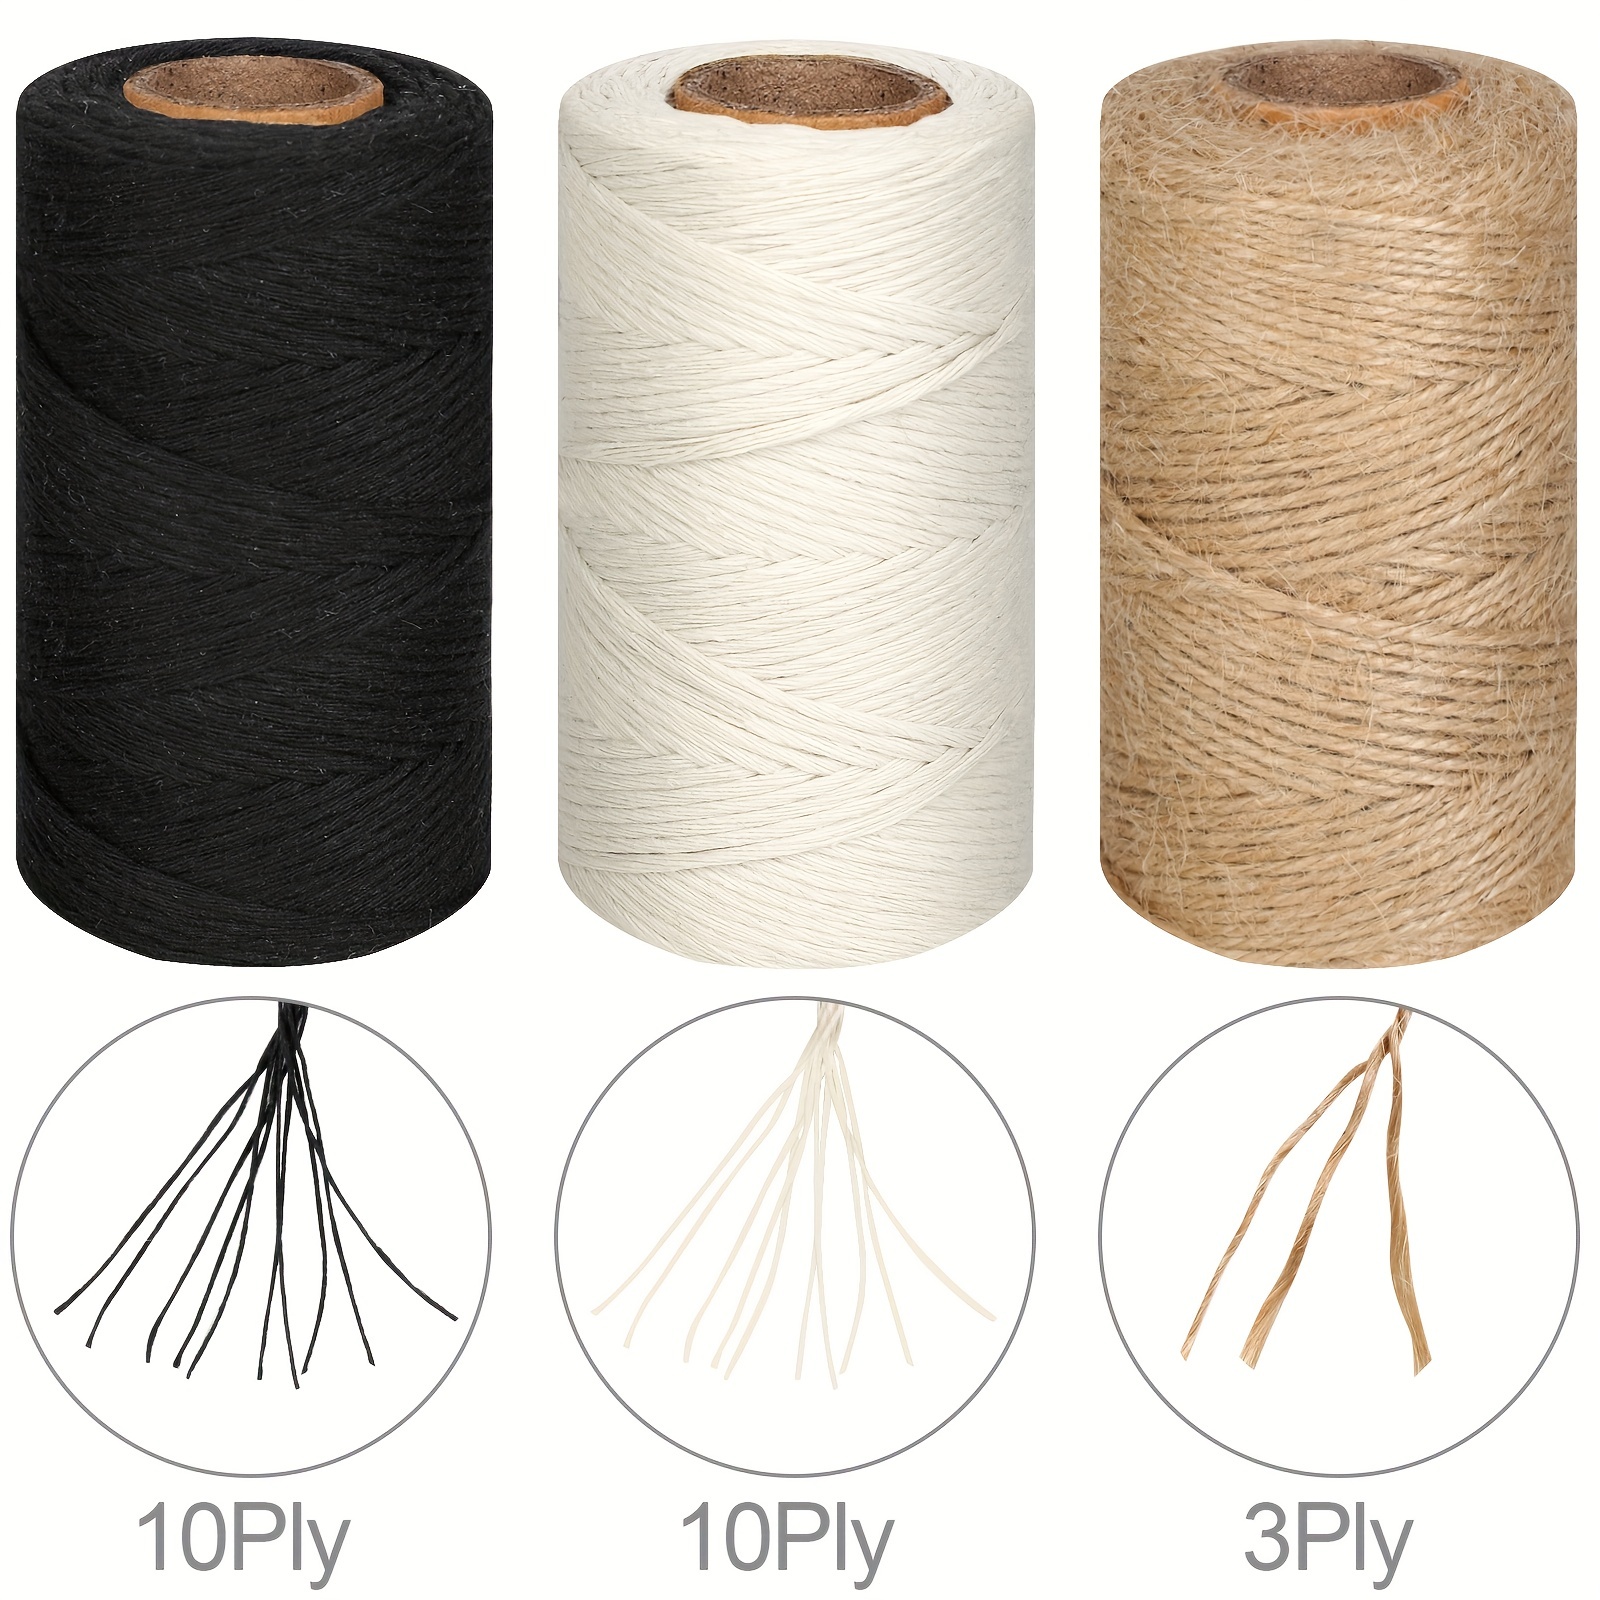 984 Ft Twine String, Natural Jute Twine, 2mm Thin White Cotton Twine Rope,  10ply Black Cotton Twine For Crafts, Art, Gardening Plants, Gift Wrapping